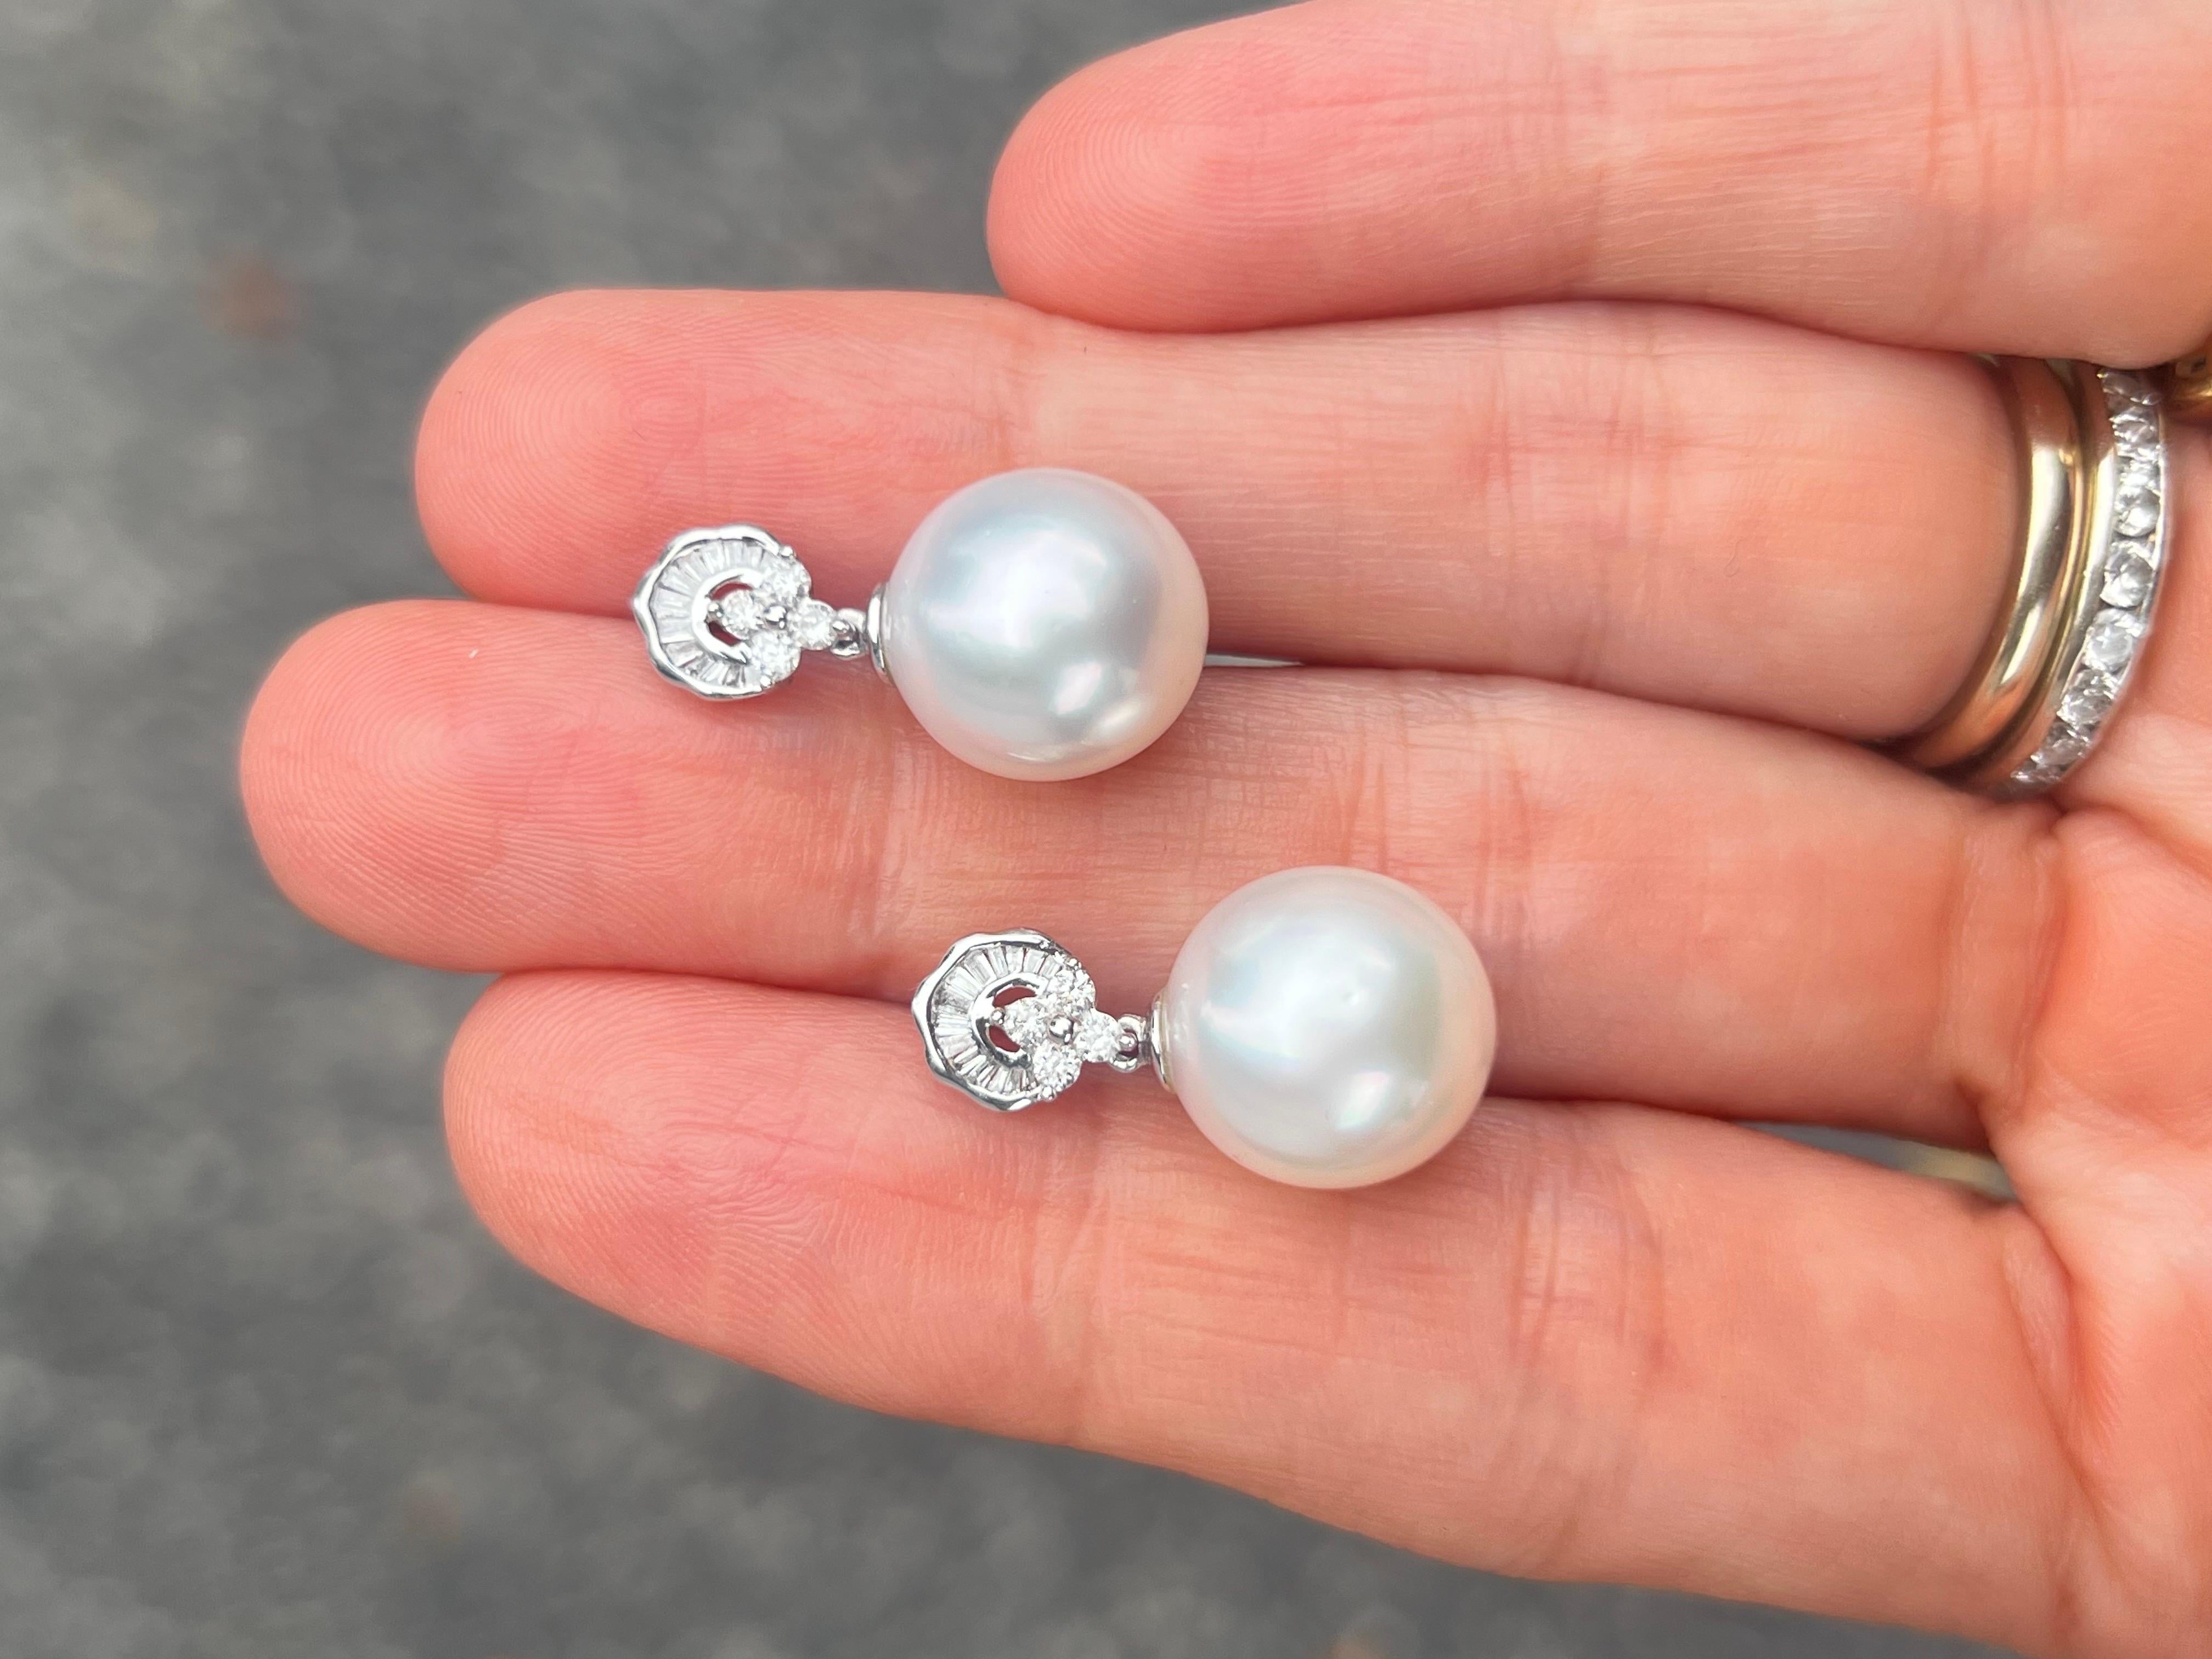 Add a feminine finishing touch to your ensemble with this beautiful diamond and pearl drop earring. Made in a contemporary style, baguette and round diamonds create an architectural element that resemble new deco designs. Below it dangles a lustrous